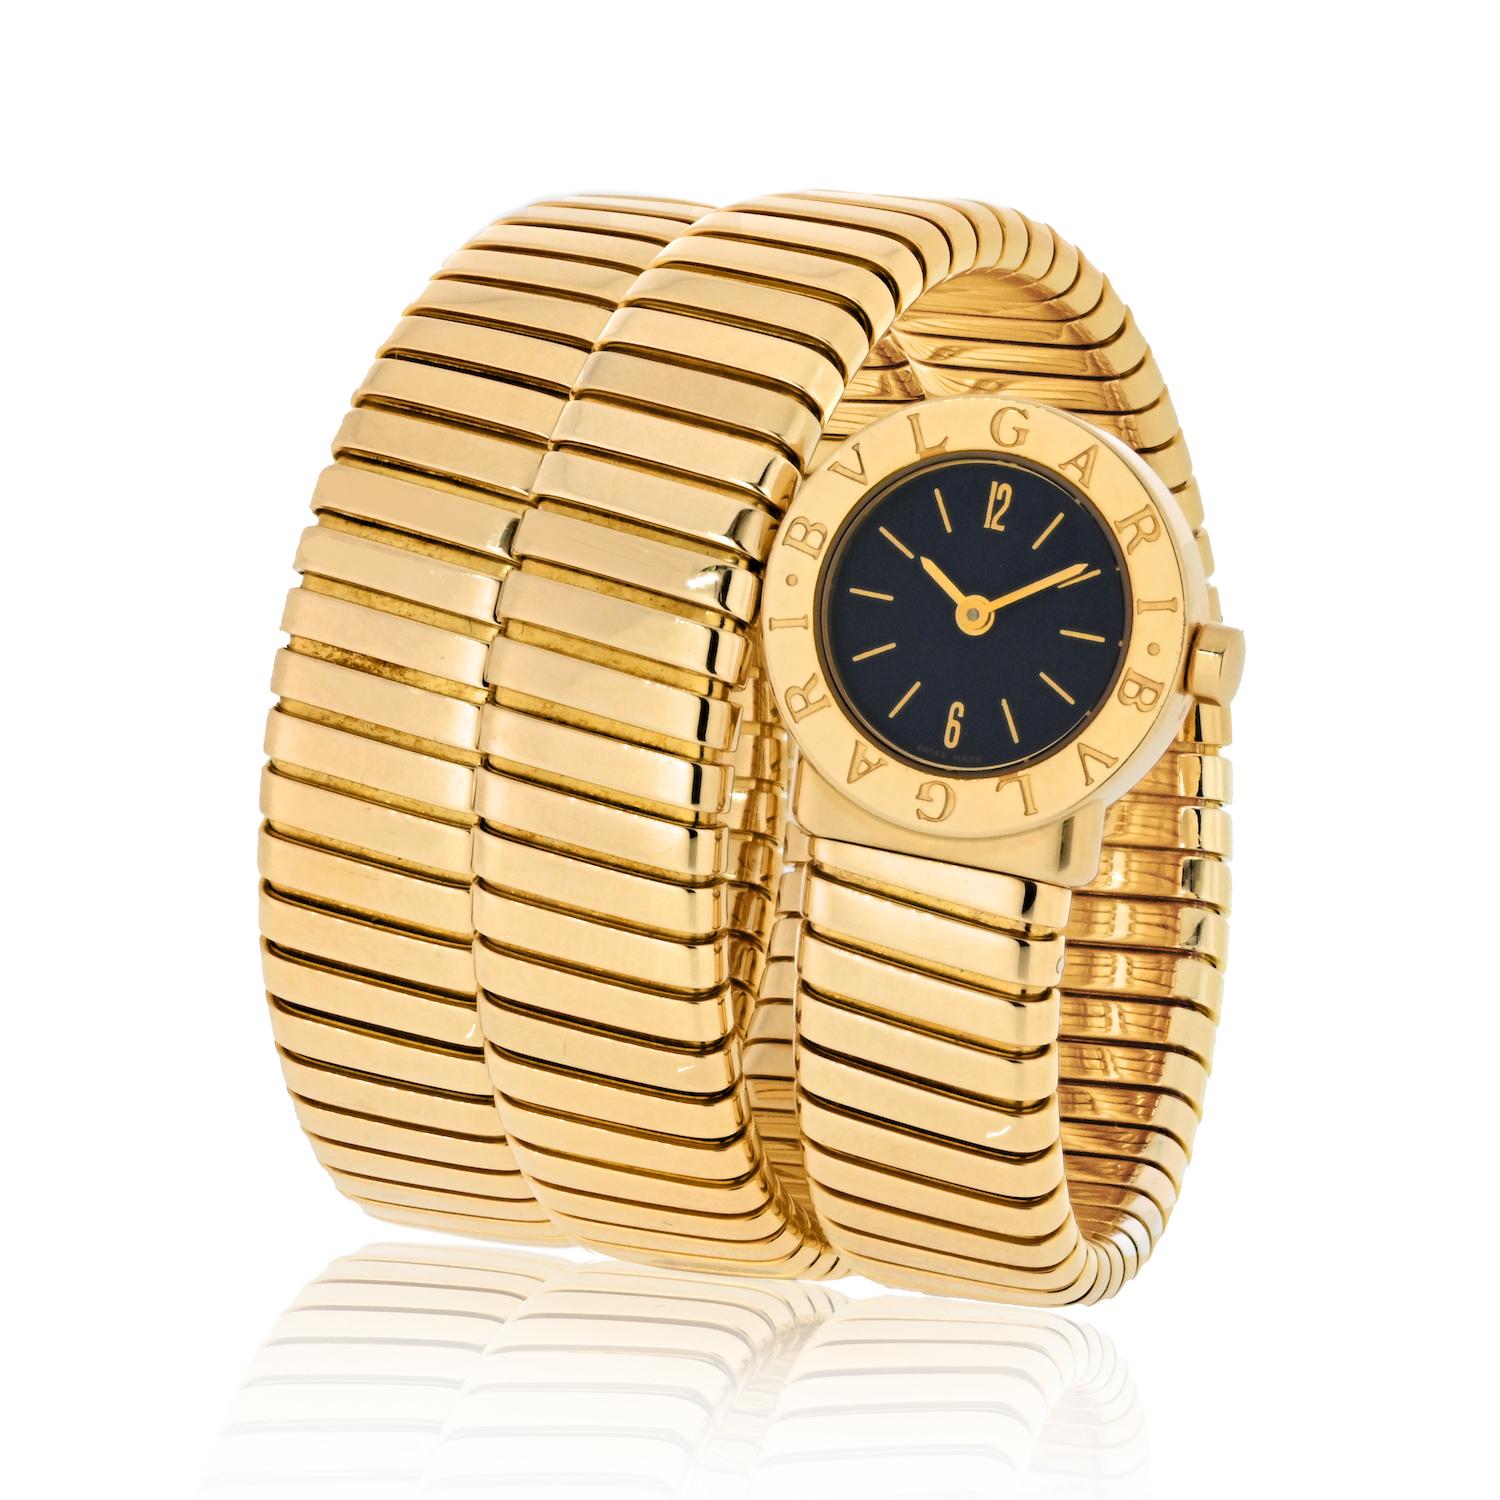 Bvlgari 18K Yellow Gold Serpenti Vintage BB19 1 T Watch.
Bulgari’s Tubogas Snake watch is an internationally recognizable classic. Immaculately crafted from 18K yellow gold, this rare vintage timepiece features a black lacquered dial set in a 19mm